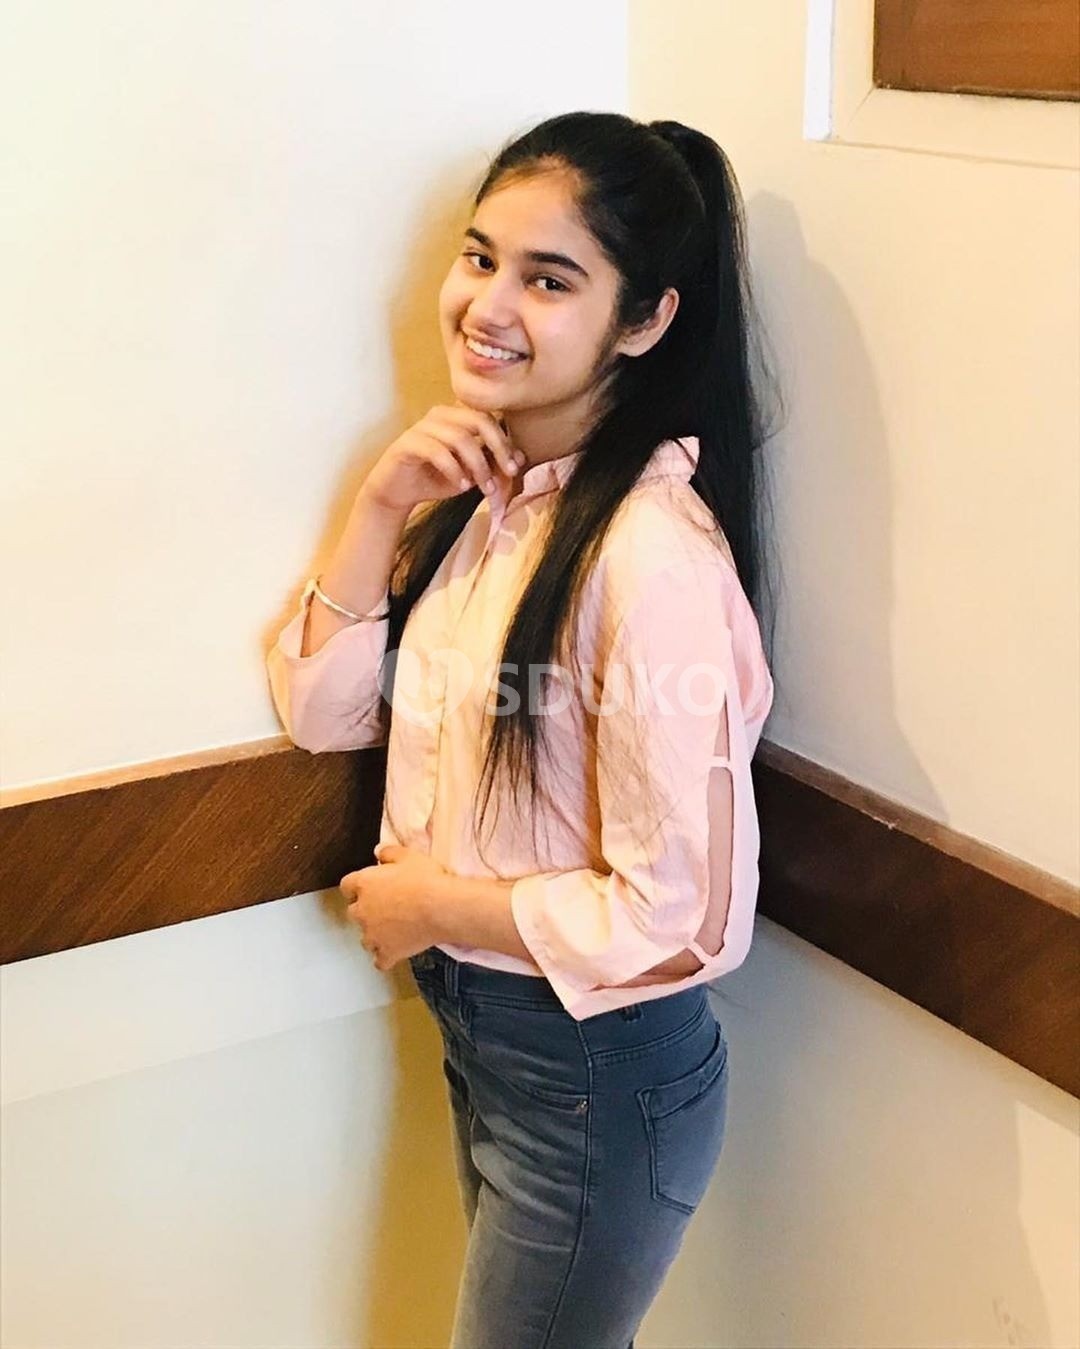 𝗗𝗜𝗩𝗬𝗔 SURAT 𝗚𝗘𝗡𝗨𝗜𝗡𝗘 VIP GENUINE INDEPENDENT VIP GIRL AVAILABLE FULLY SAFE AND SECURE